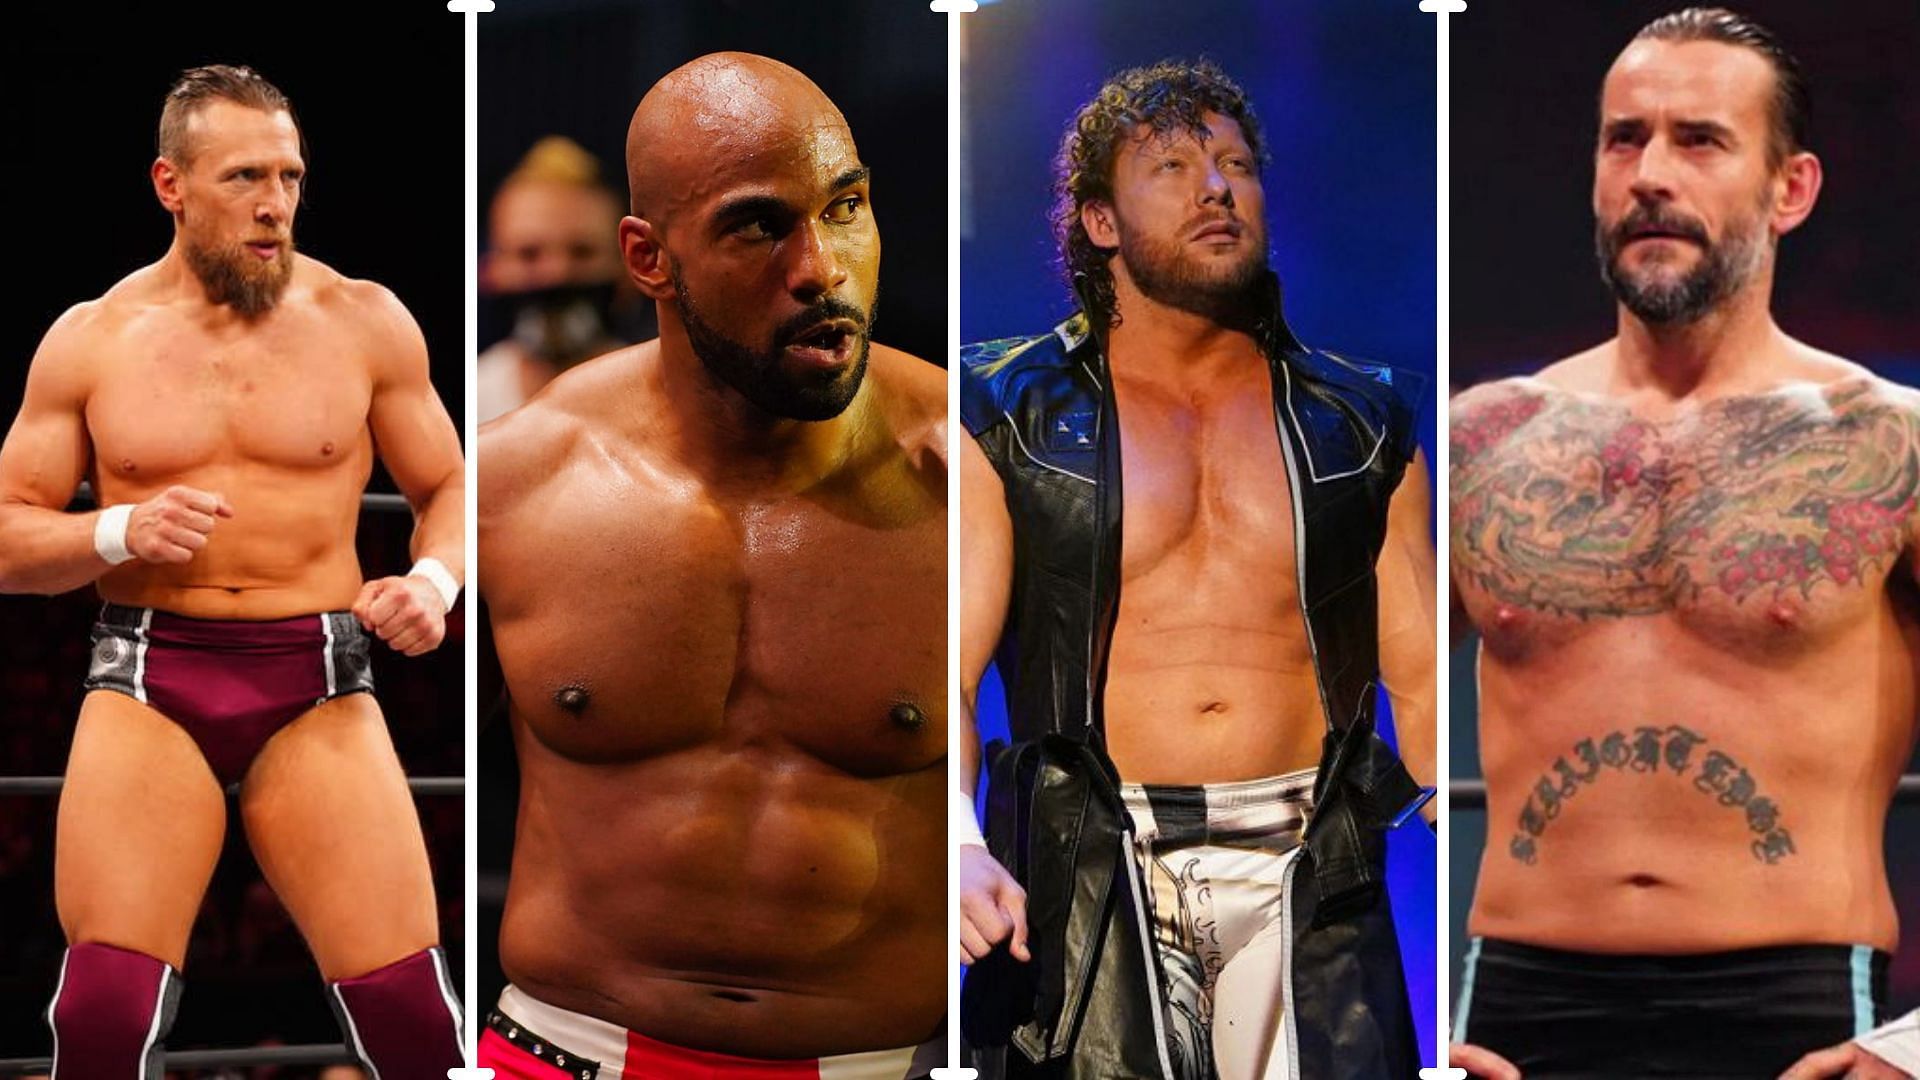 Several AEW stars are currently shelved due to injury